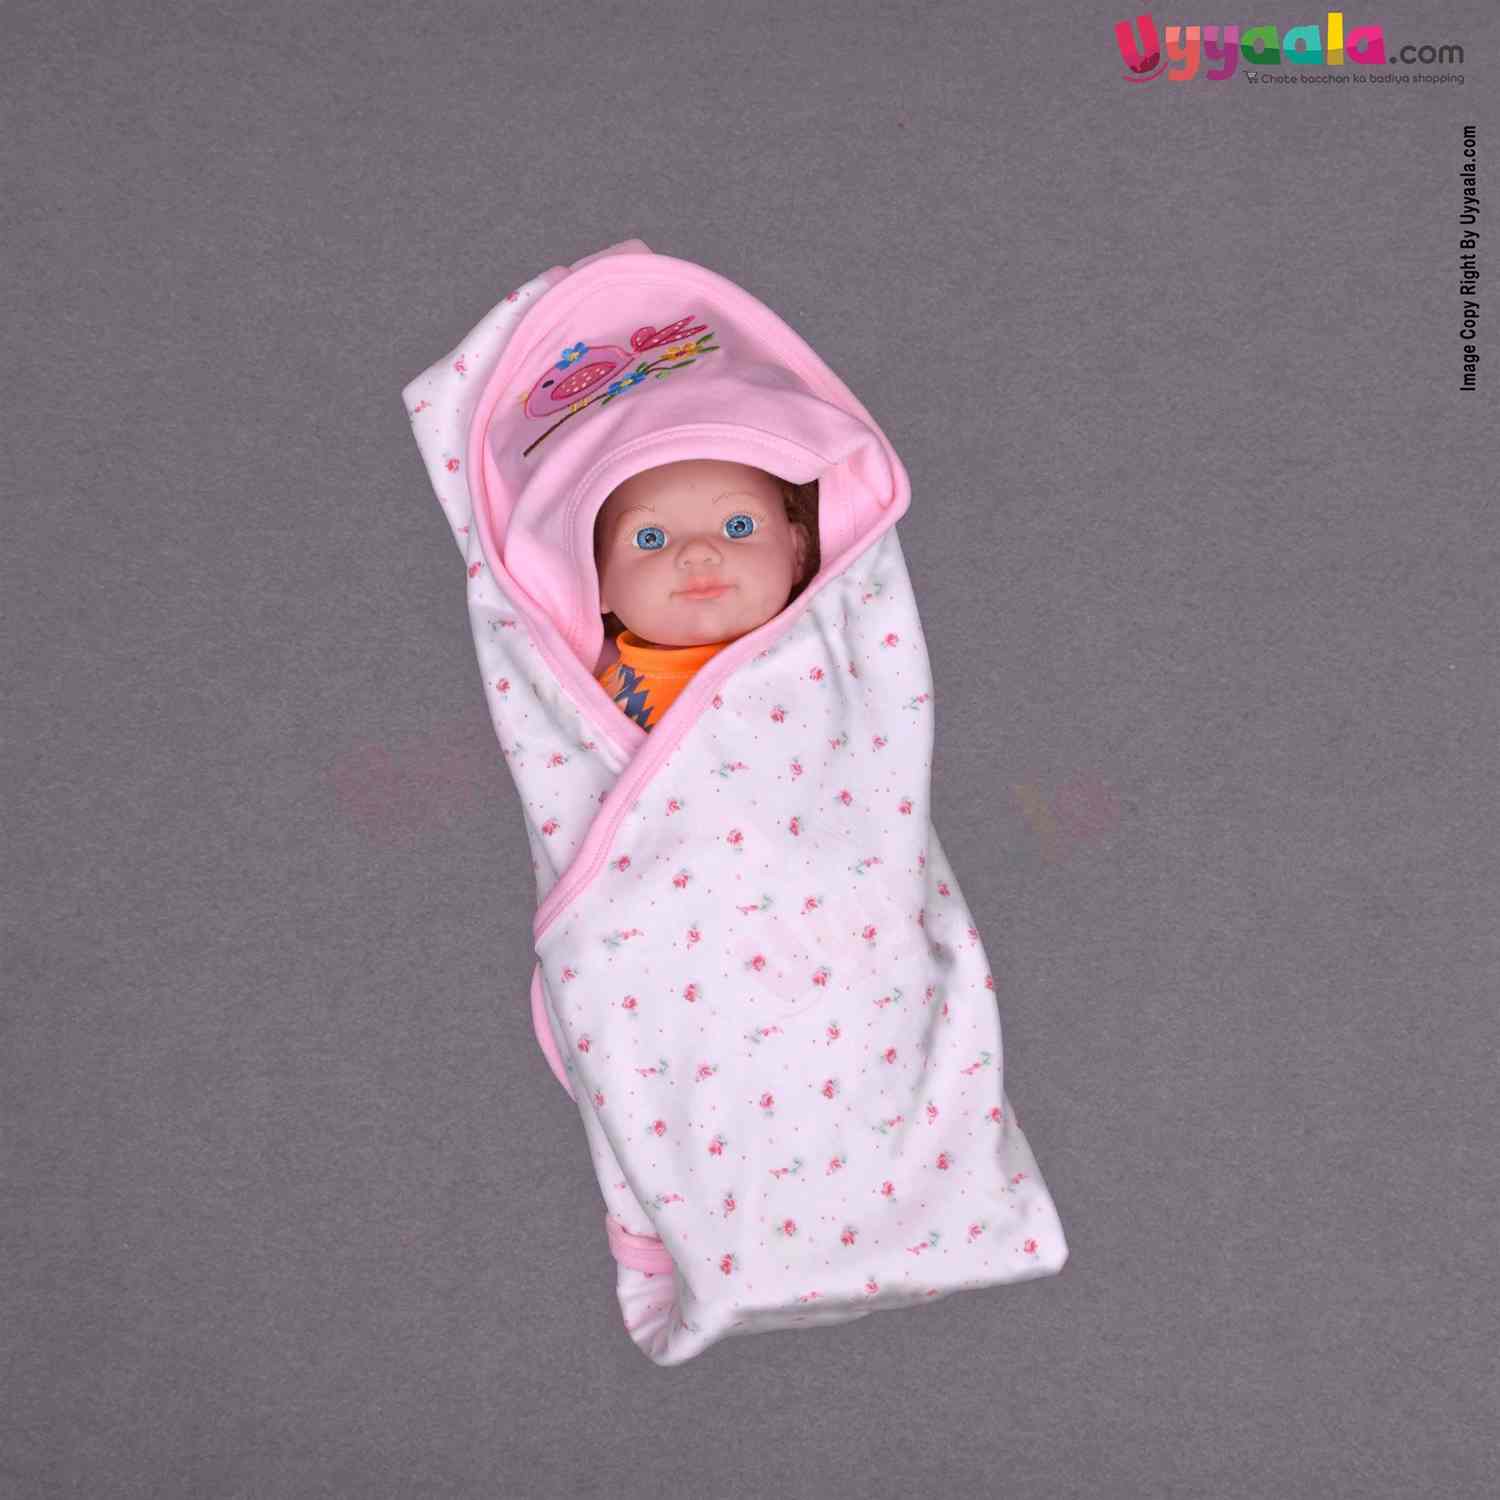 BABY STATION Hooded Double Layer Towel Hosiery Cloth with Flowers Print